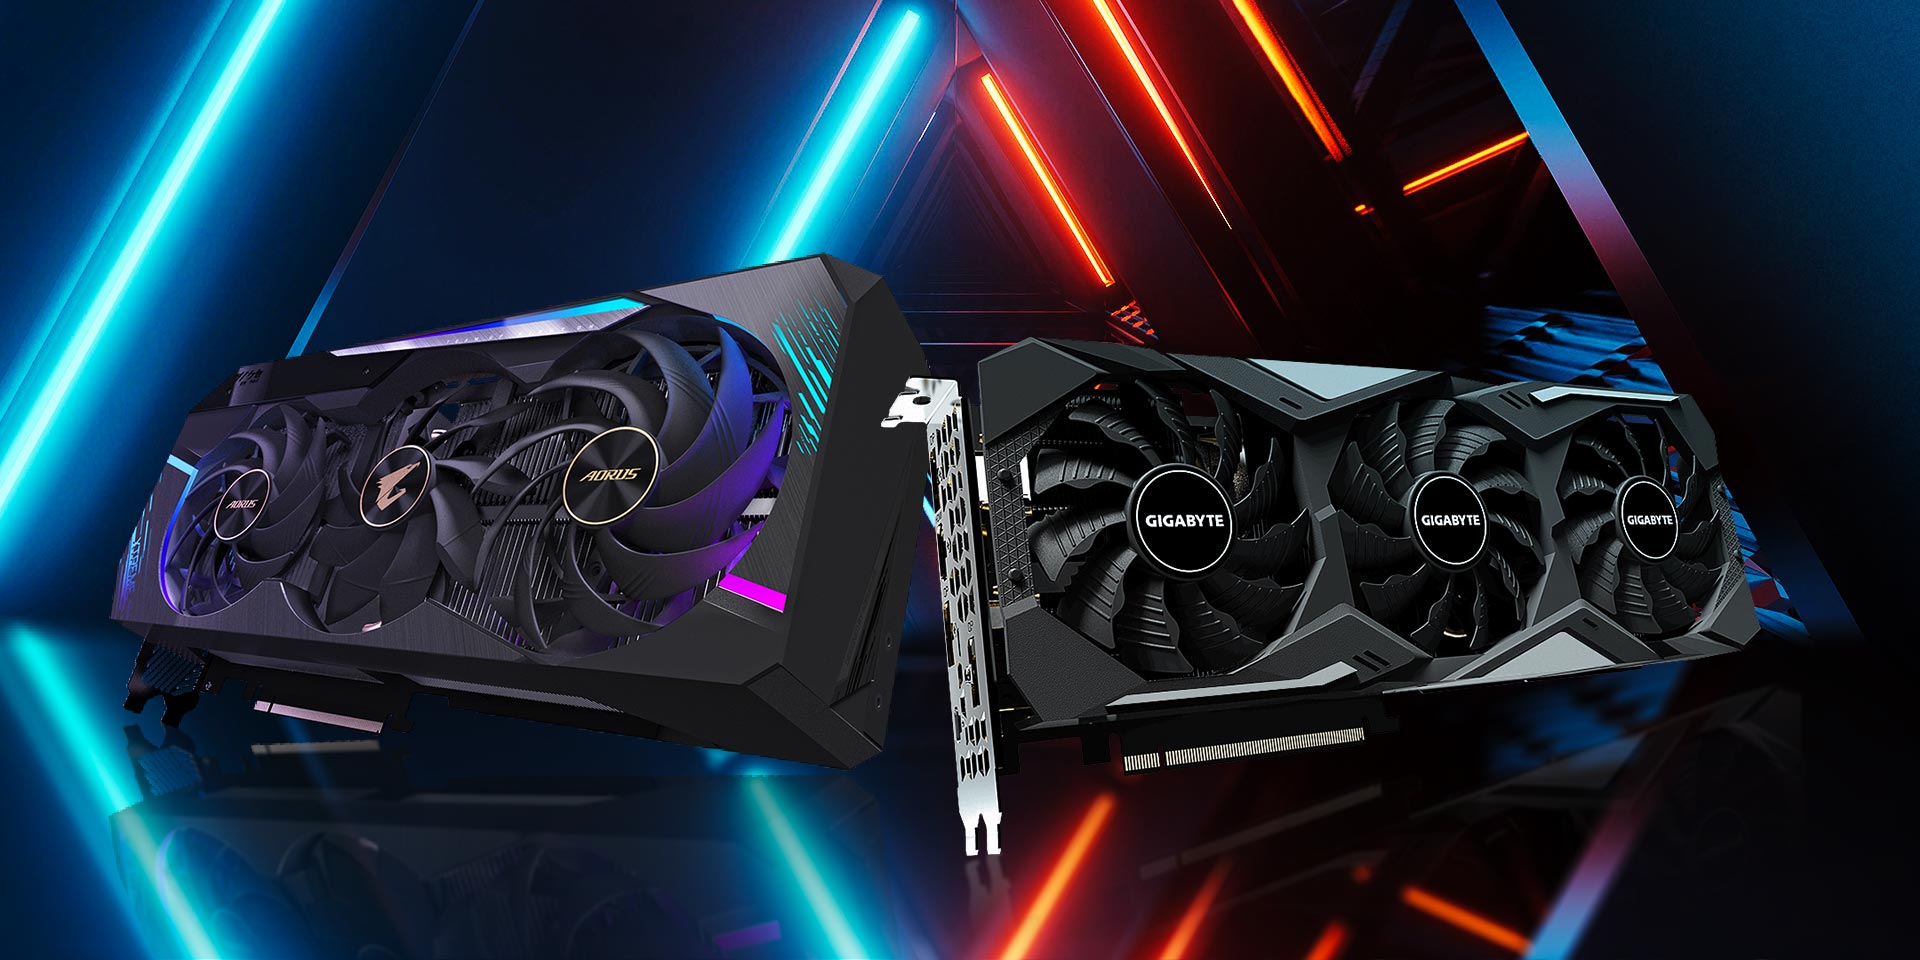 Get 4 Years Warranty for Your AORUS / GIGABYTE Graphics Card